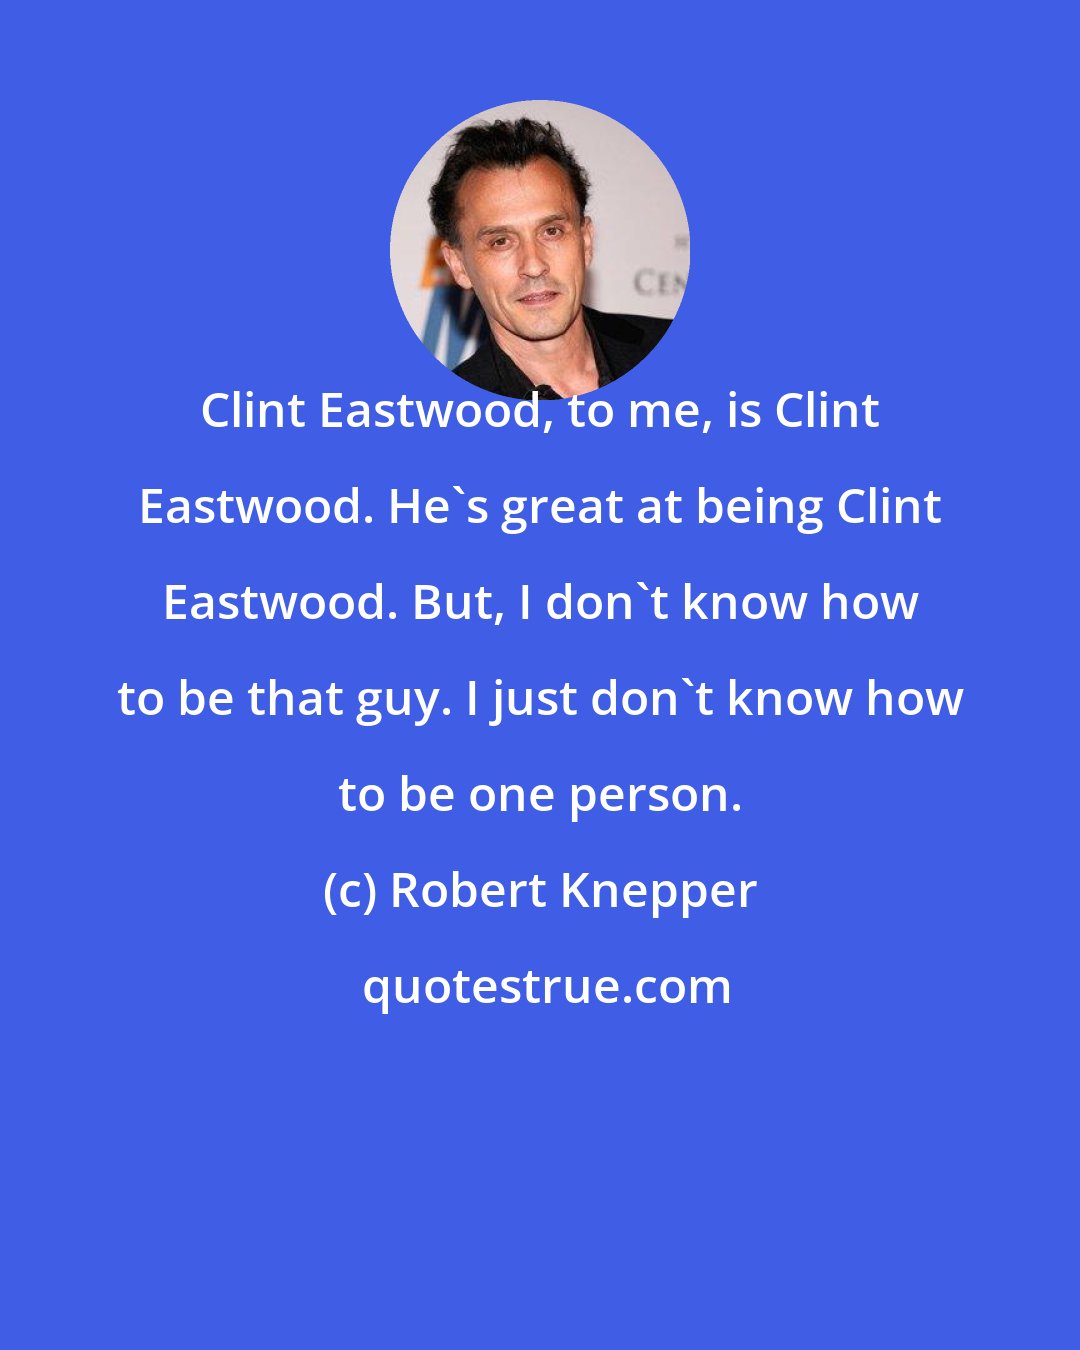 Robert Knepper: Clint Eastwood, to me, is Clint Eastwood. He's great at being Clint Eastwood. But, I don't know how to be that guy. I just don't know how to be one person.